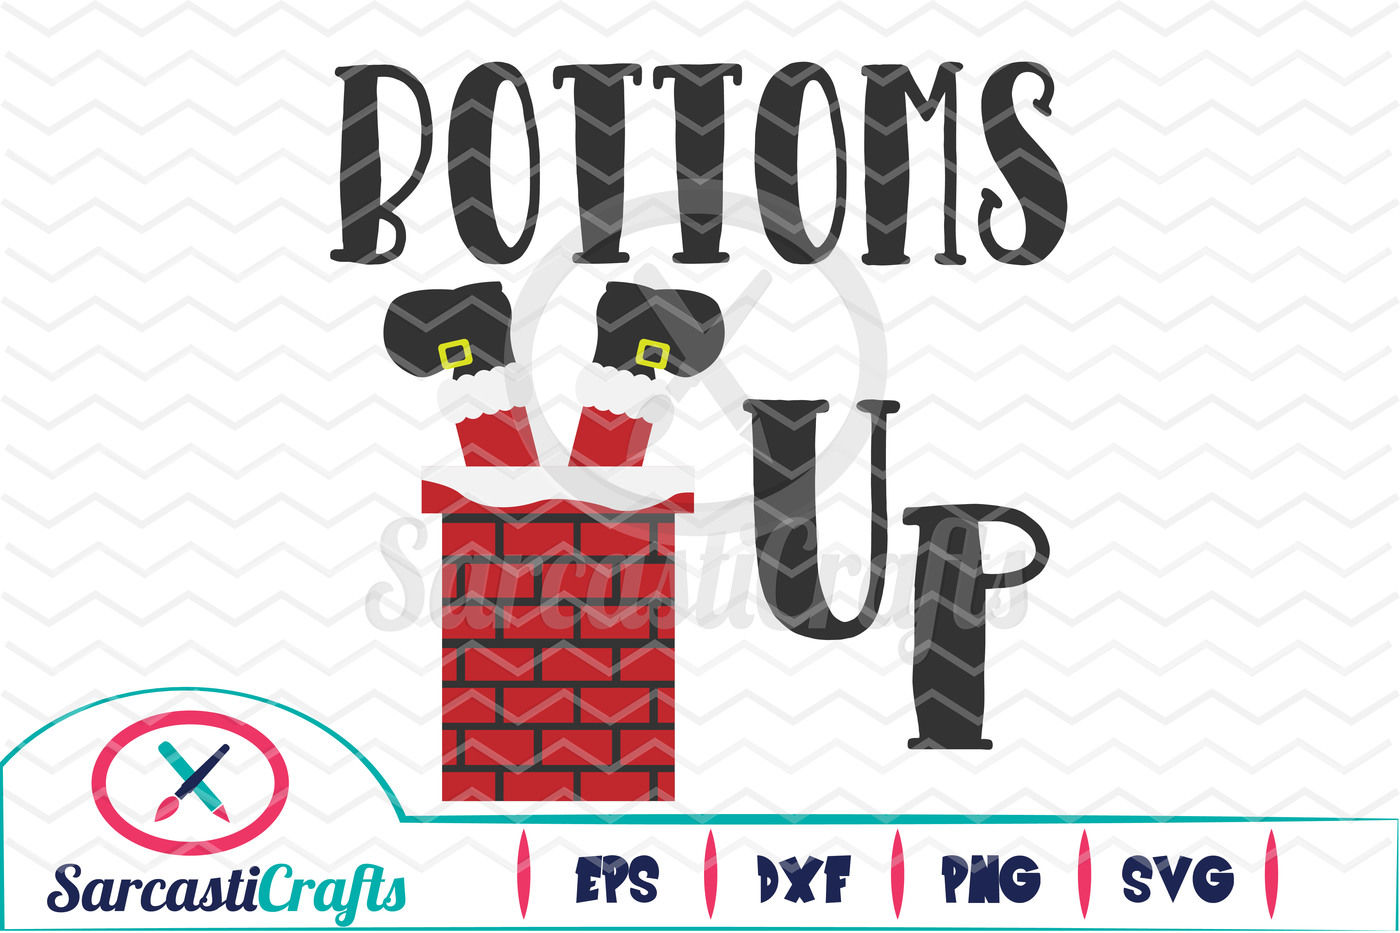 Bottoms Up Christmas Graphic Svg Eps Dxf Png By Sarcasticrafts Thehungryjpeg Com